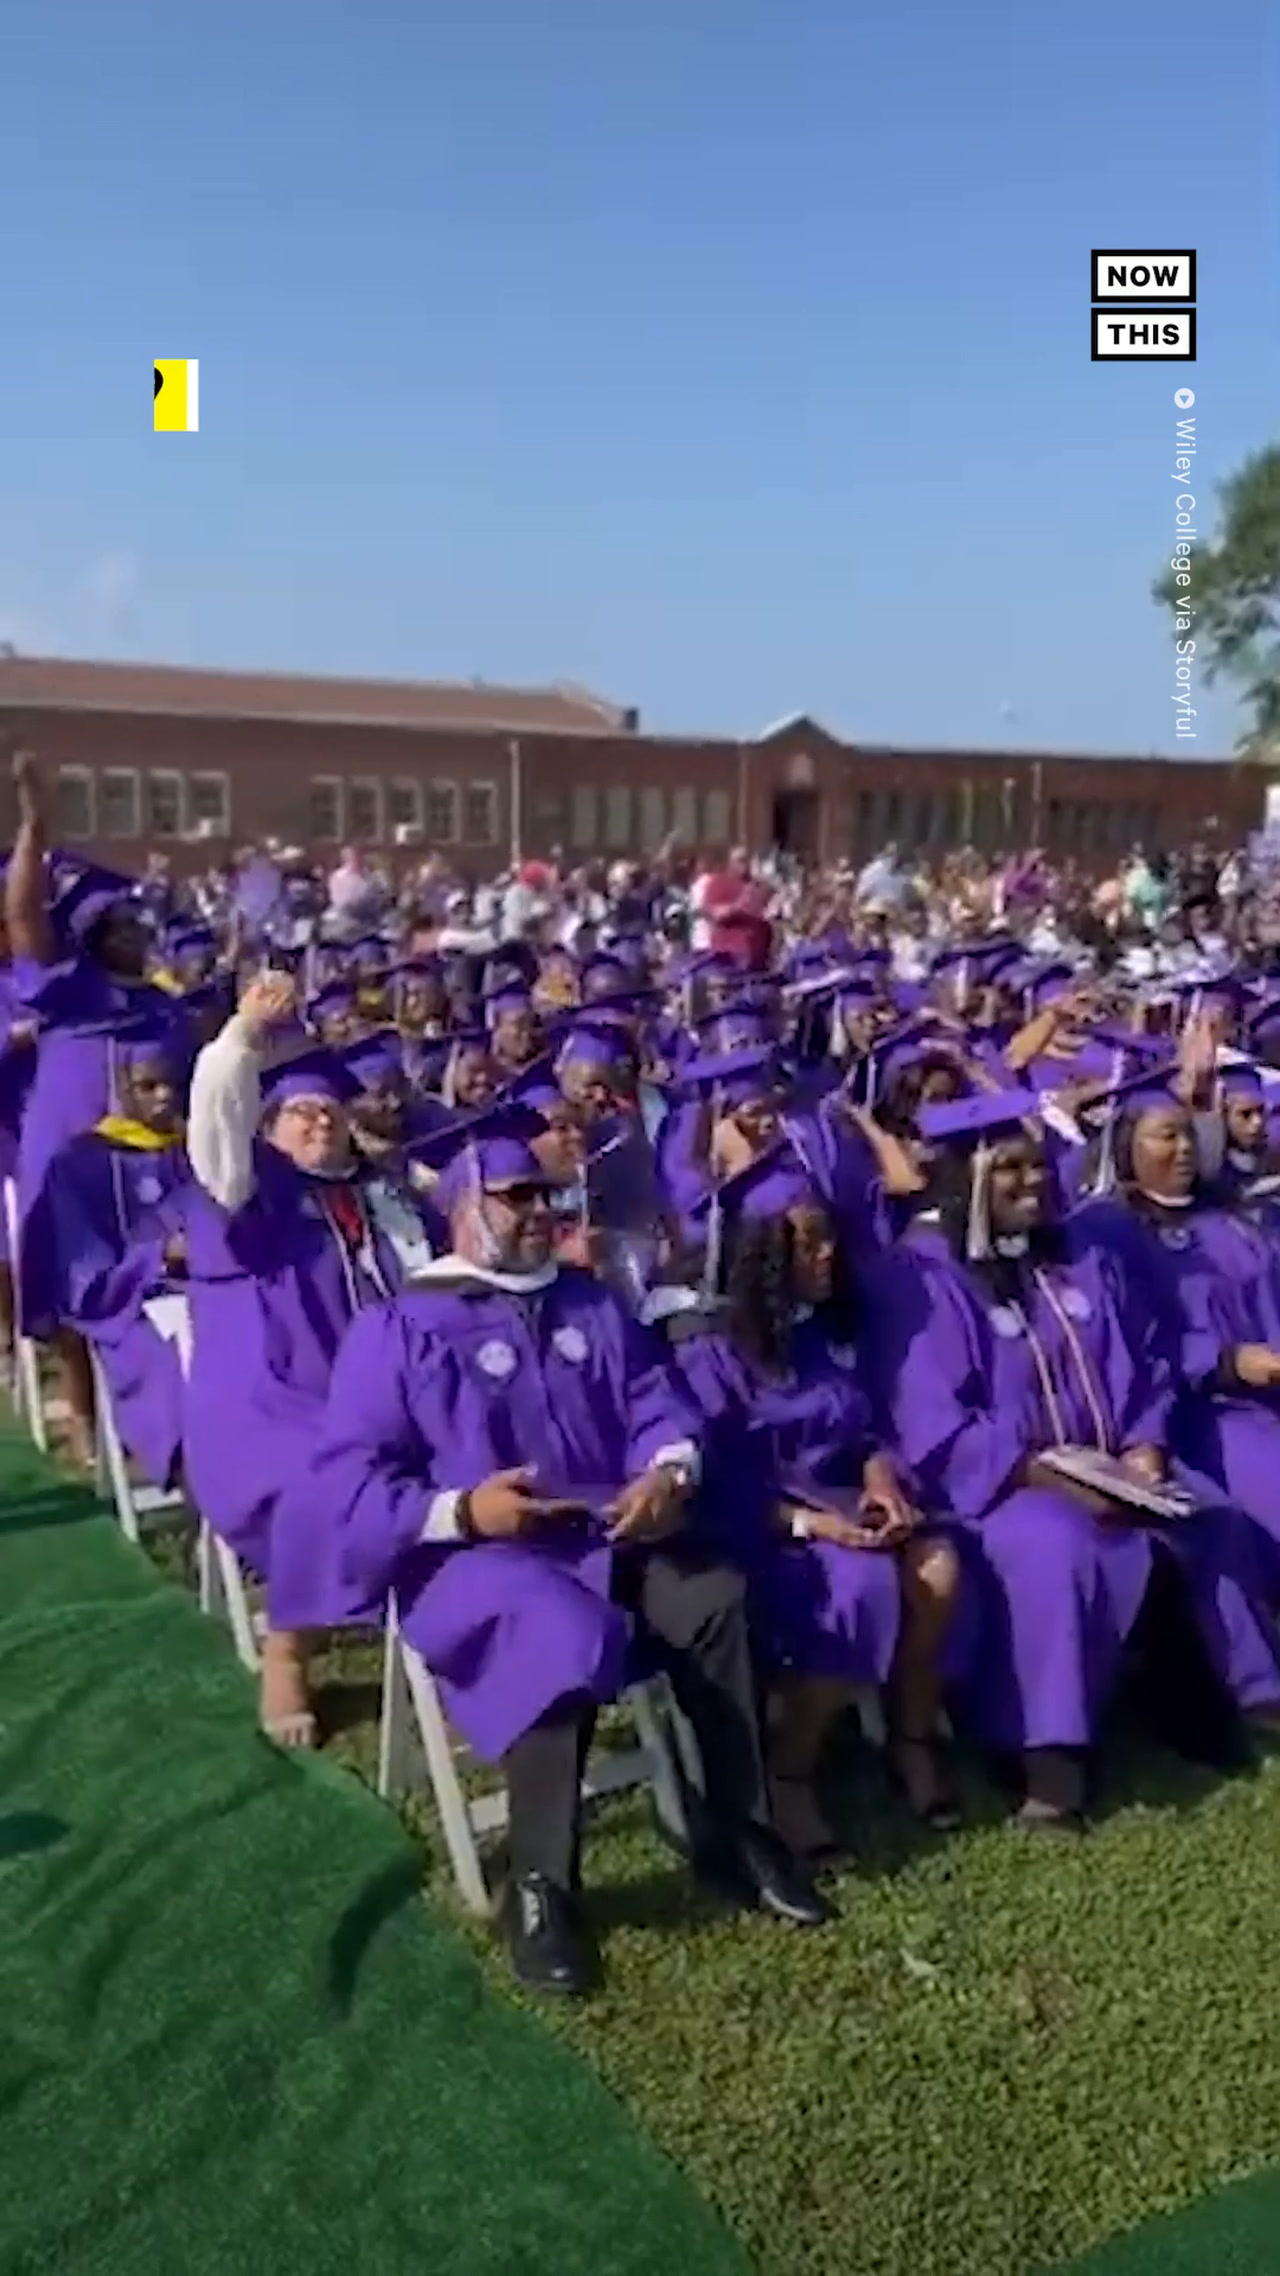 Watch the Moment College Grads Learned Their Student Debt Was Cleared